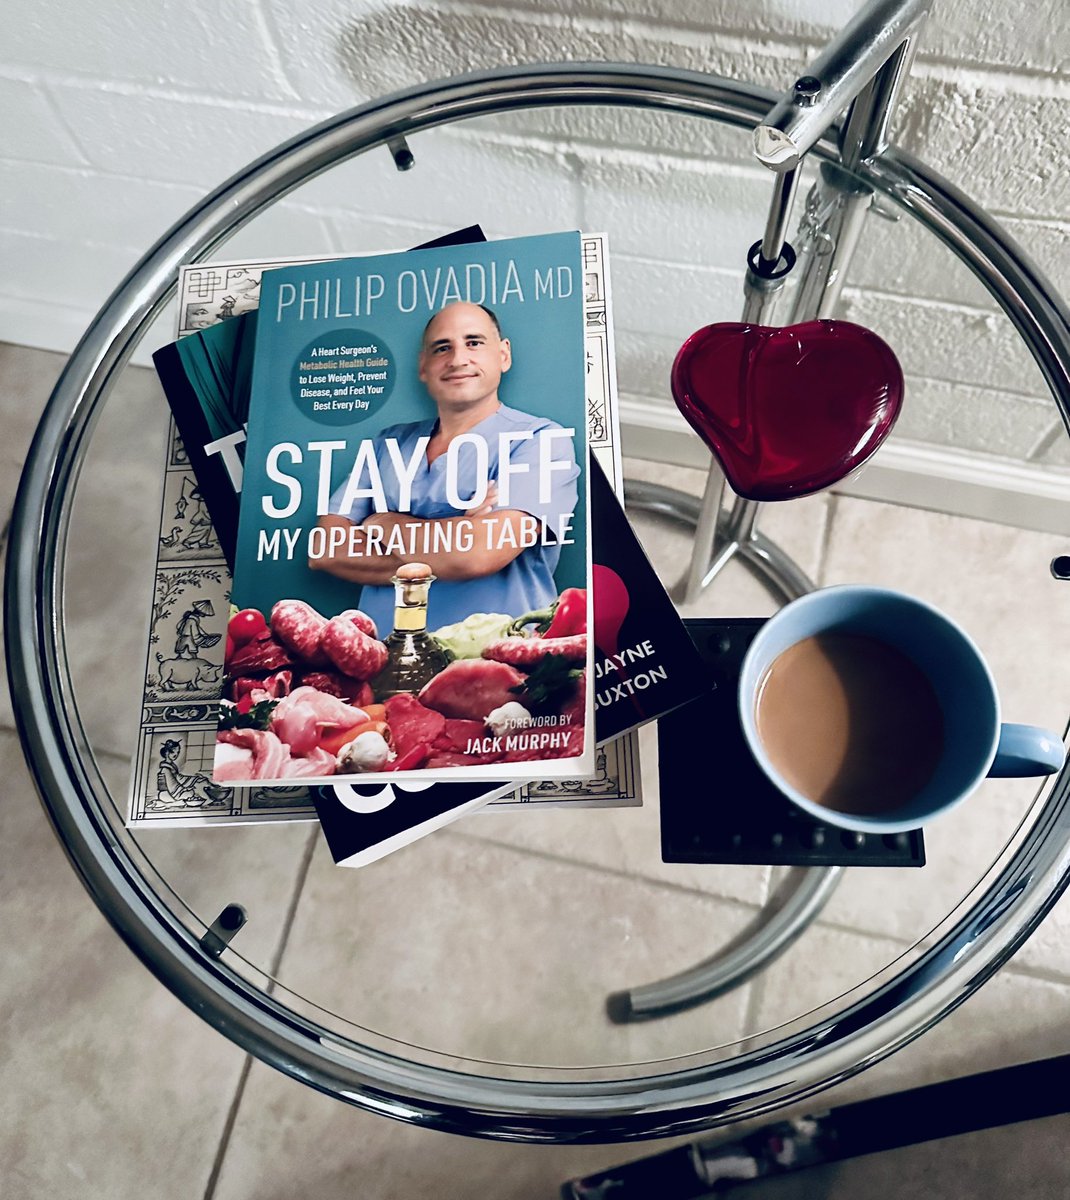 Morning read! Metabolic Health is key to aging vibrantly! @ifixhearts 
#healthcoach Build yourself a health team! In the US we have a sick care system dare to build your own health & wellness care system! #greatbook #lchf  #keto #carnivore #fitover60 #books